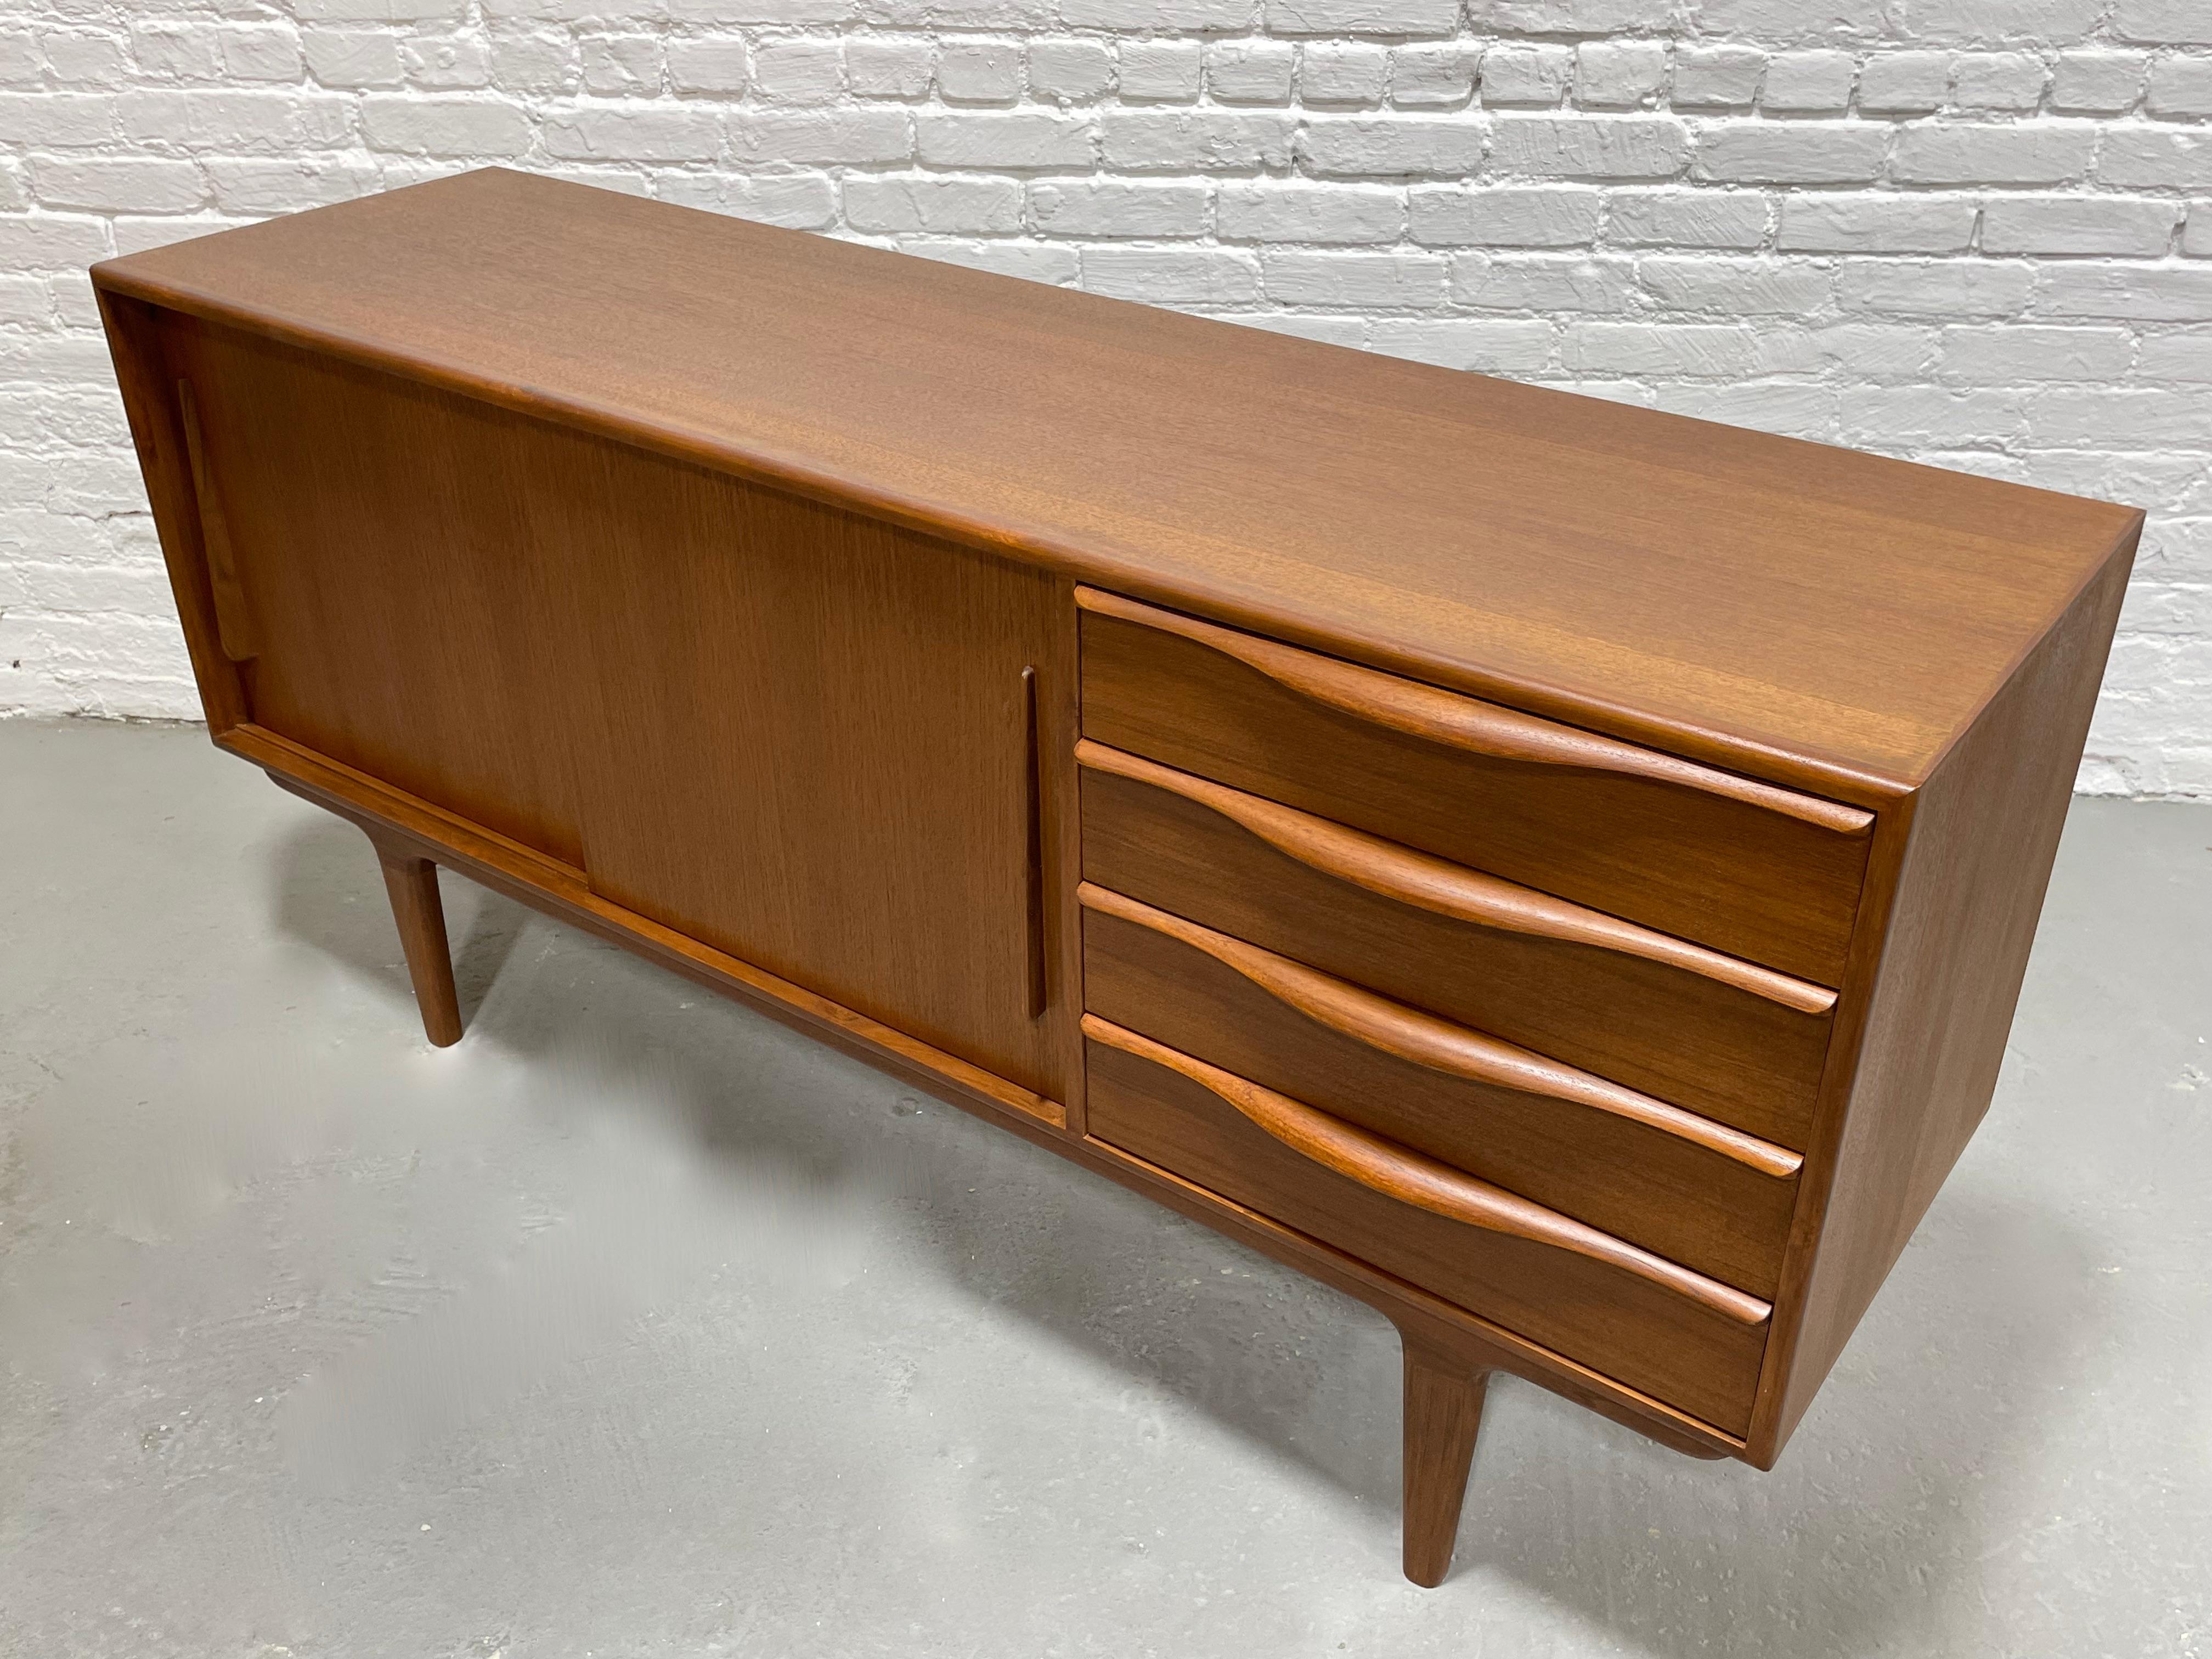 Sculptural Mid-Century Modern Styled Credenza / Media Stand / Sideboard For Sale 4